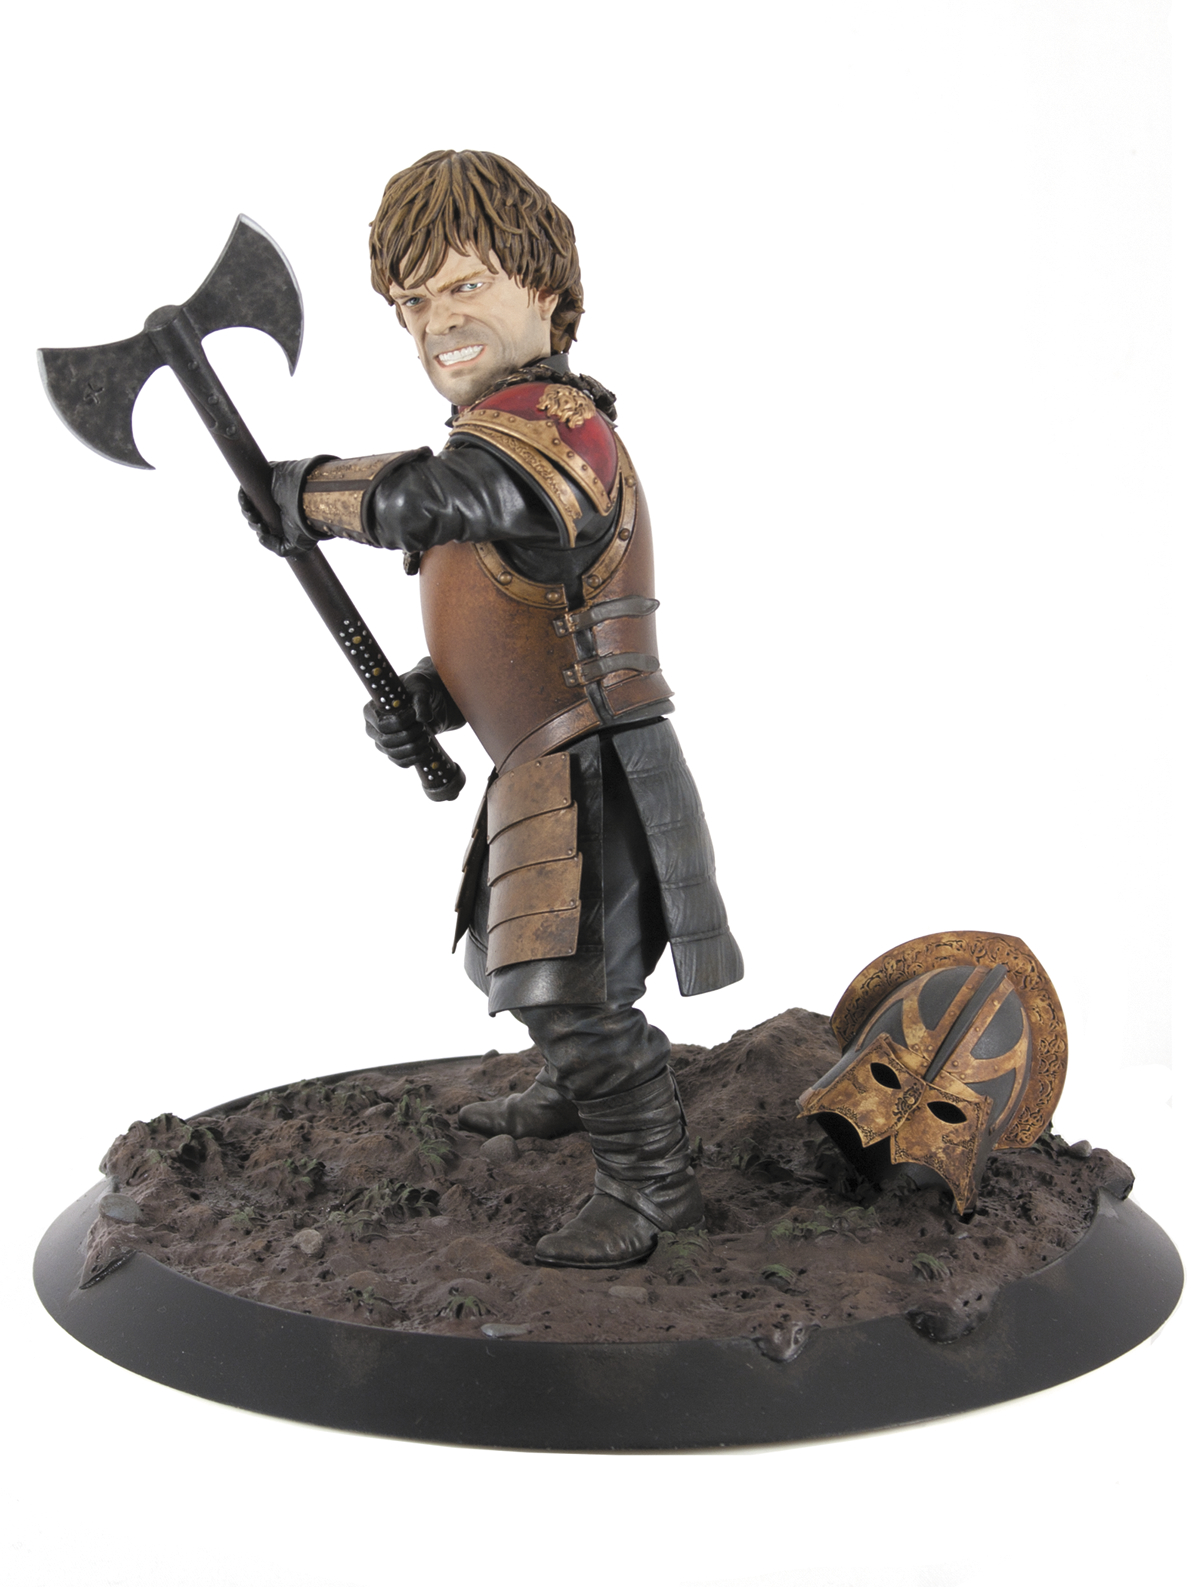 GAME OF THRONES STATUE TYRION